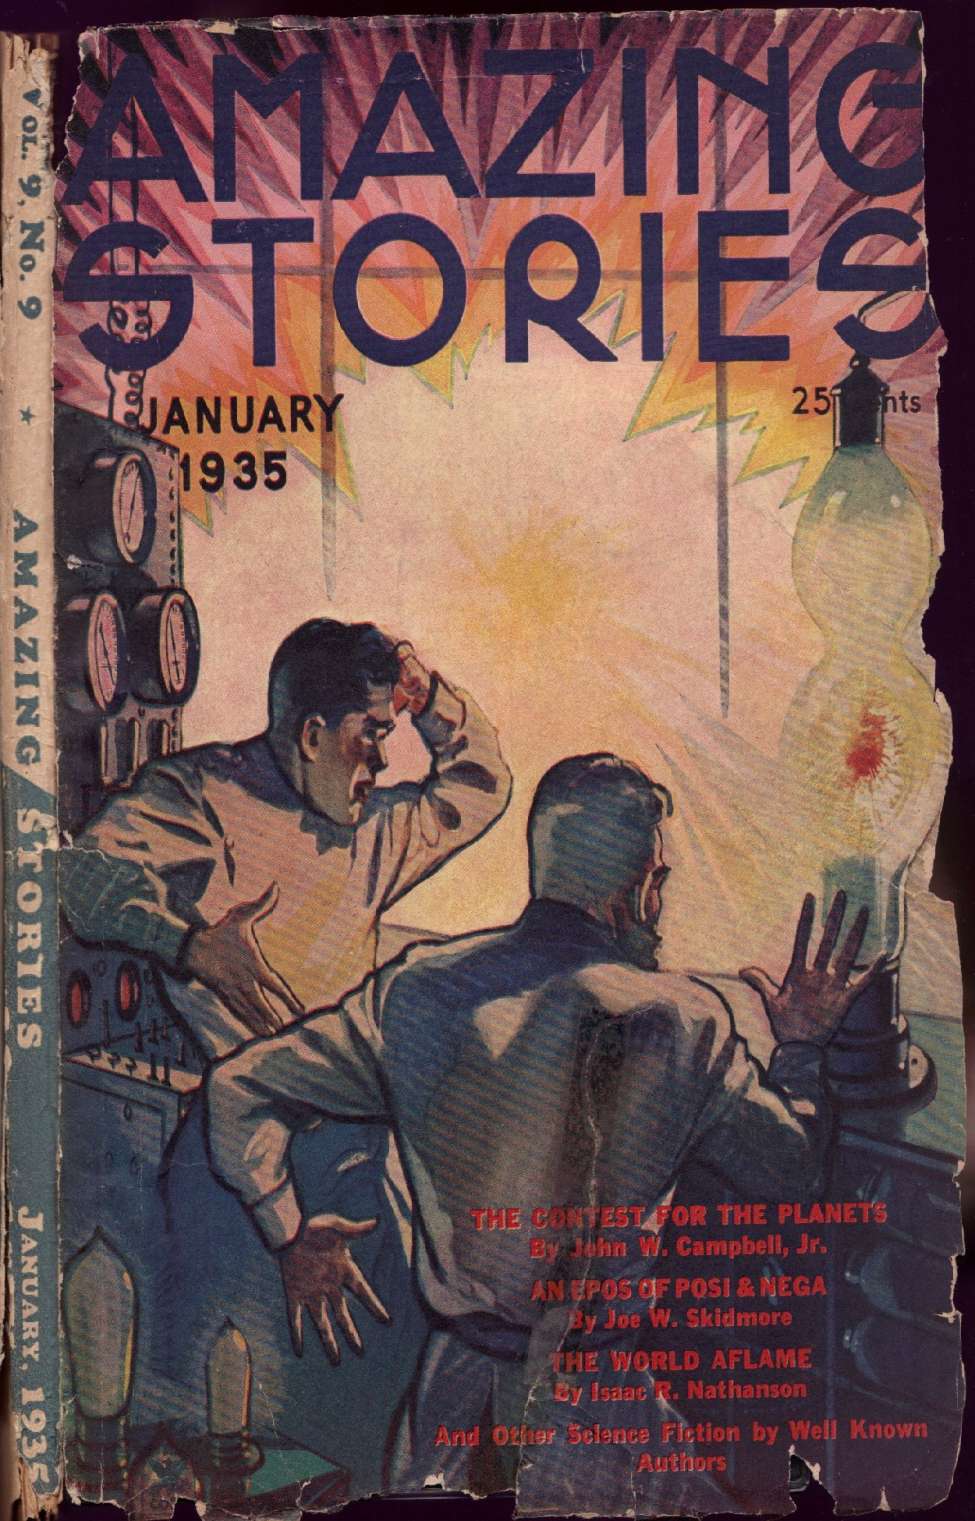 Book Cover For Amazing Stories v9 9 - The Contest of the Planets - John W. Campbell, Jr.